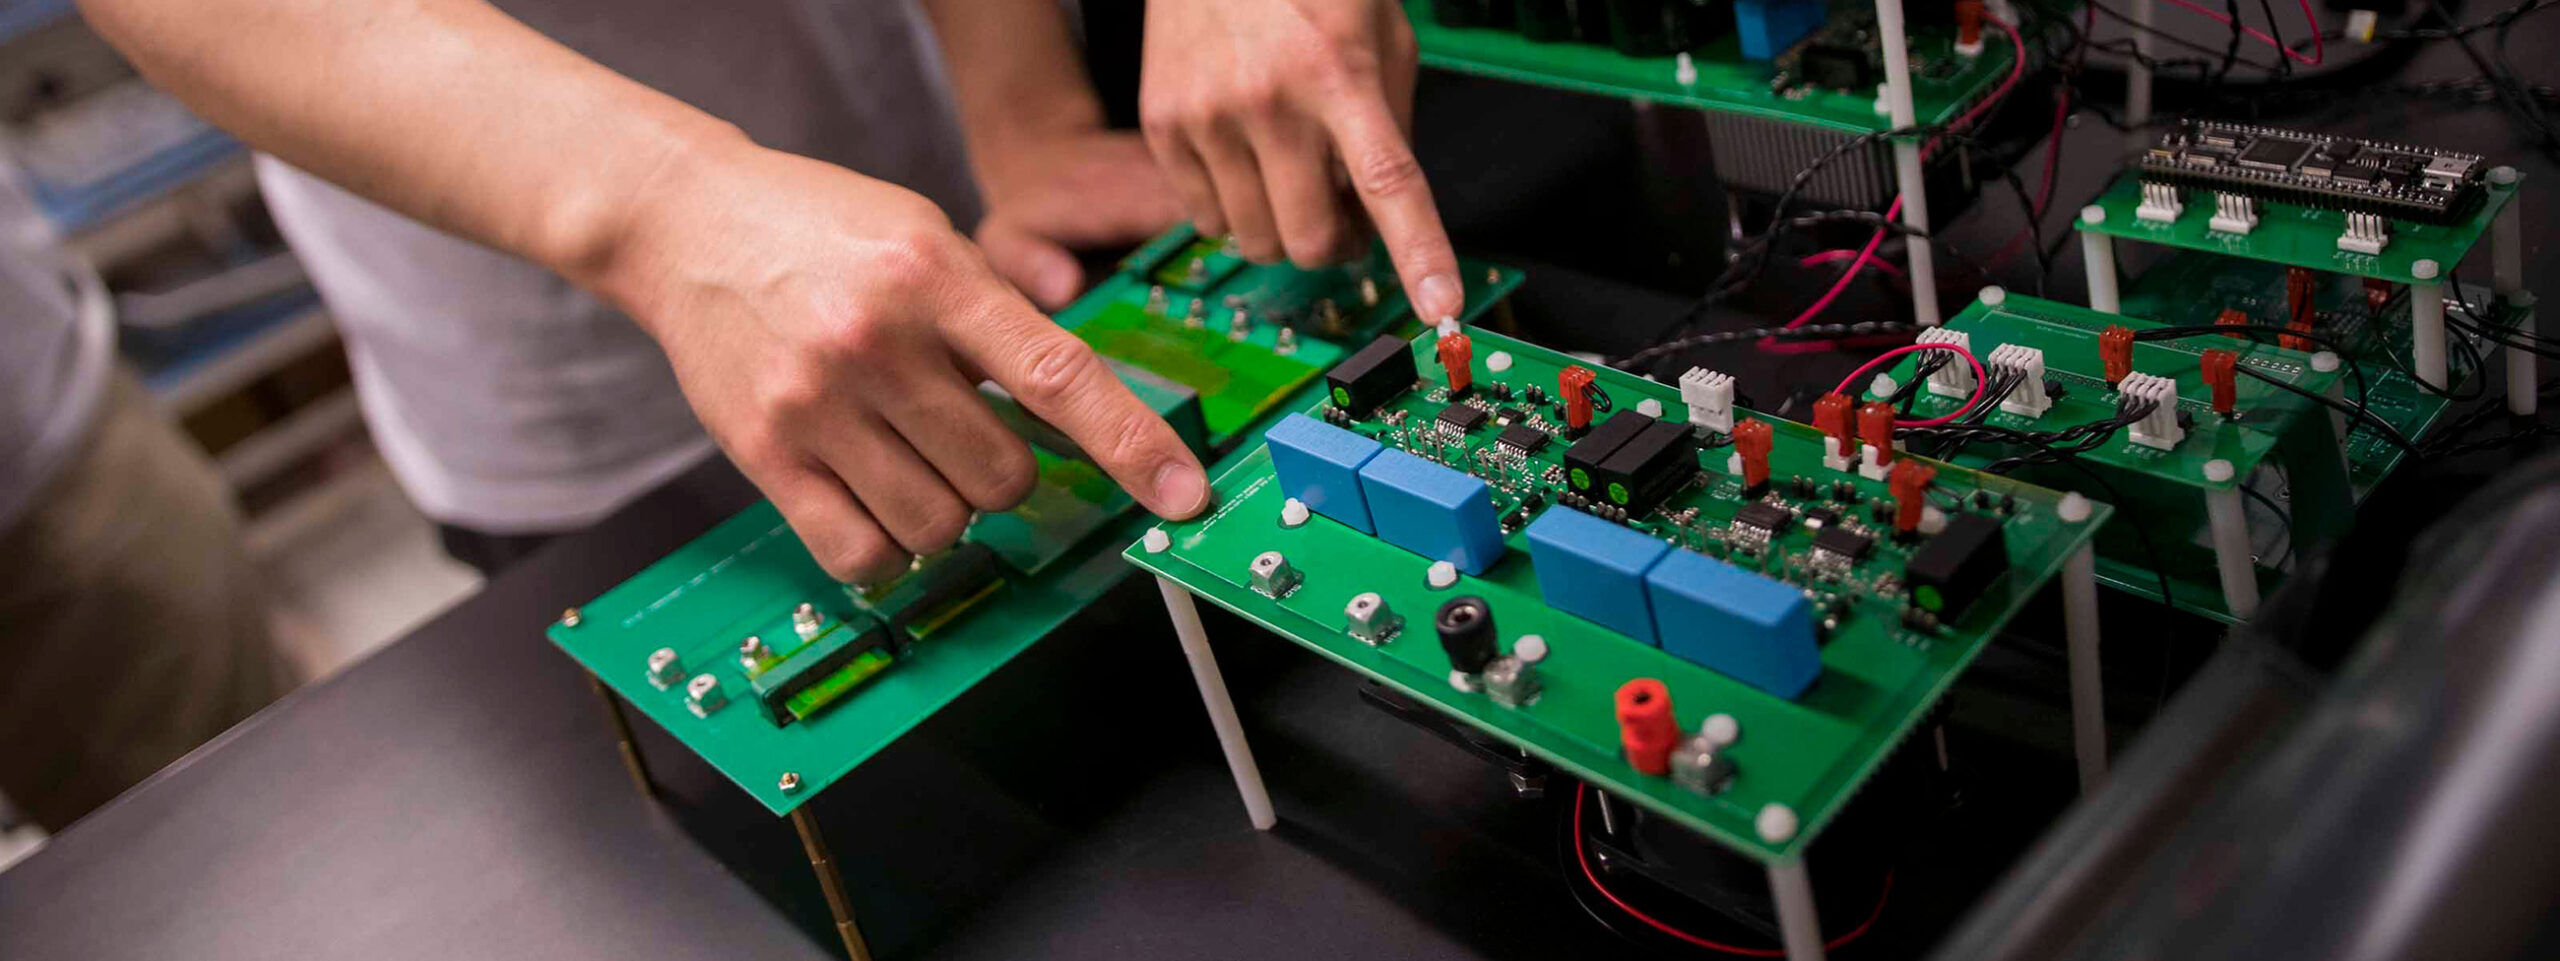 A pair of hands works on semiconductor devices.